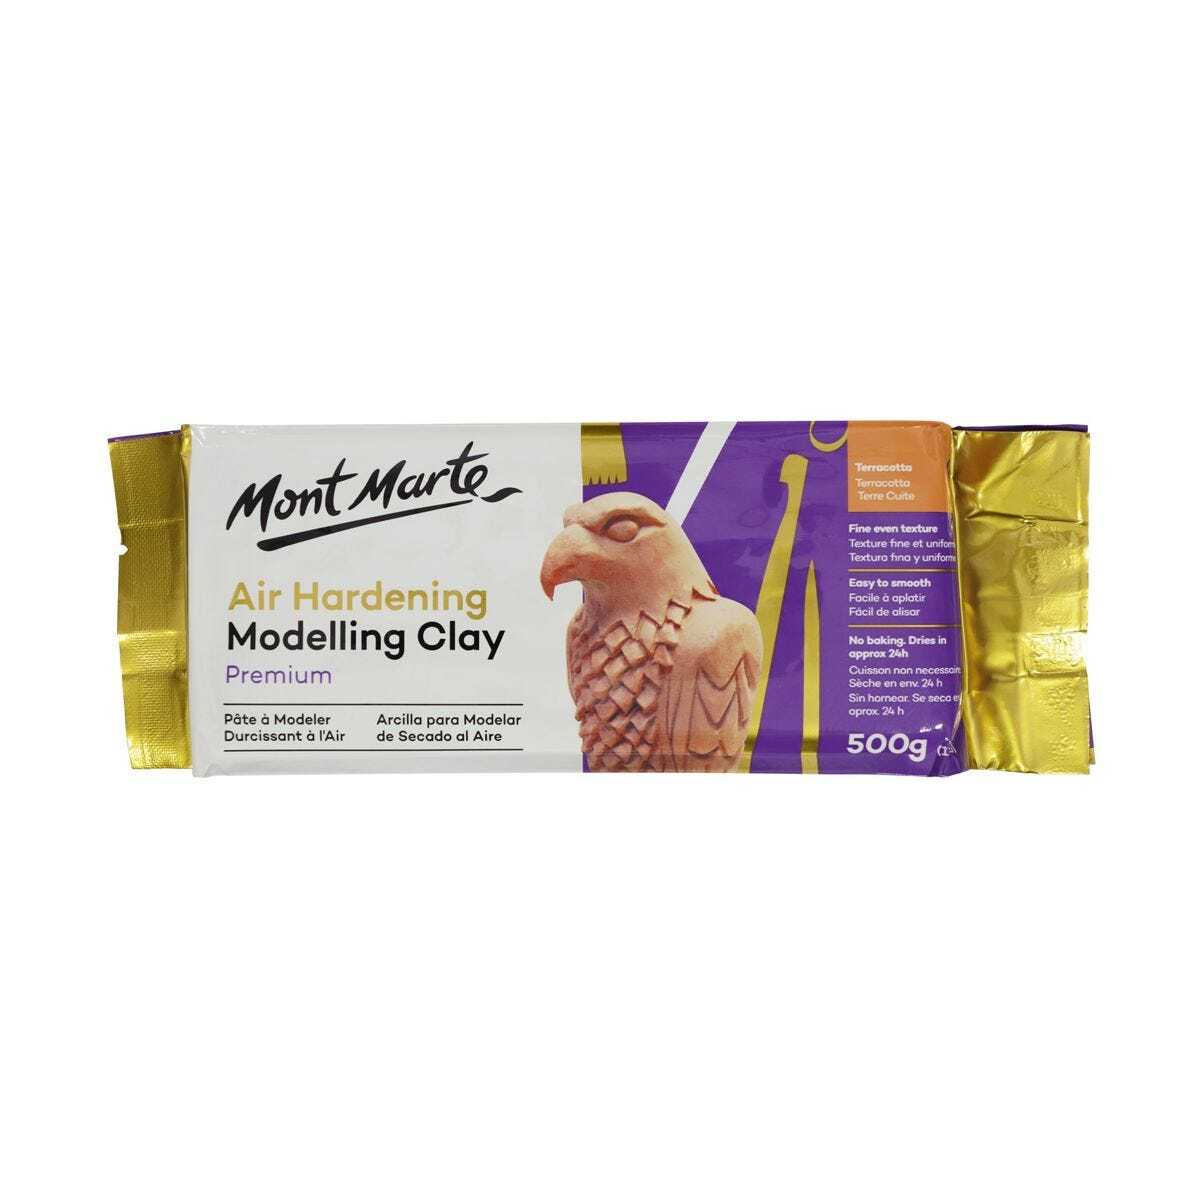 mont marte air hardening modelling clay